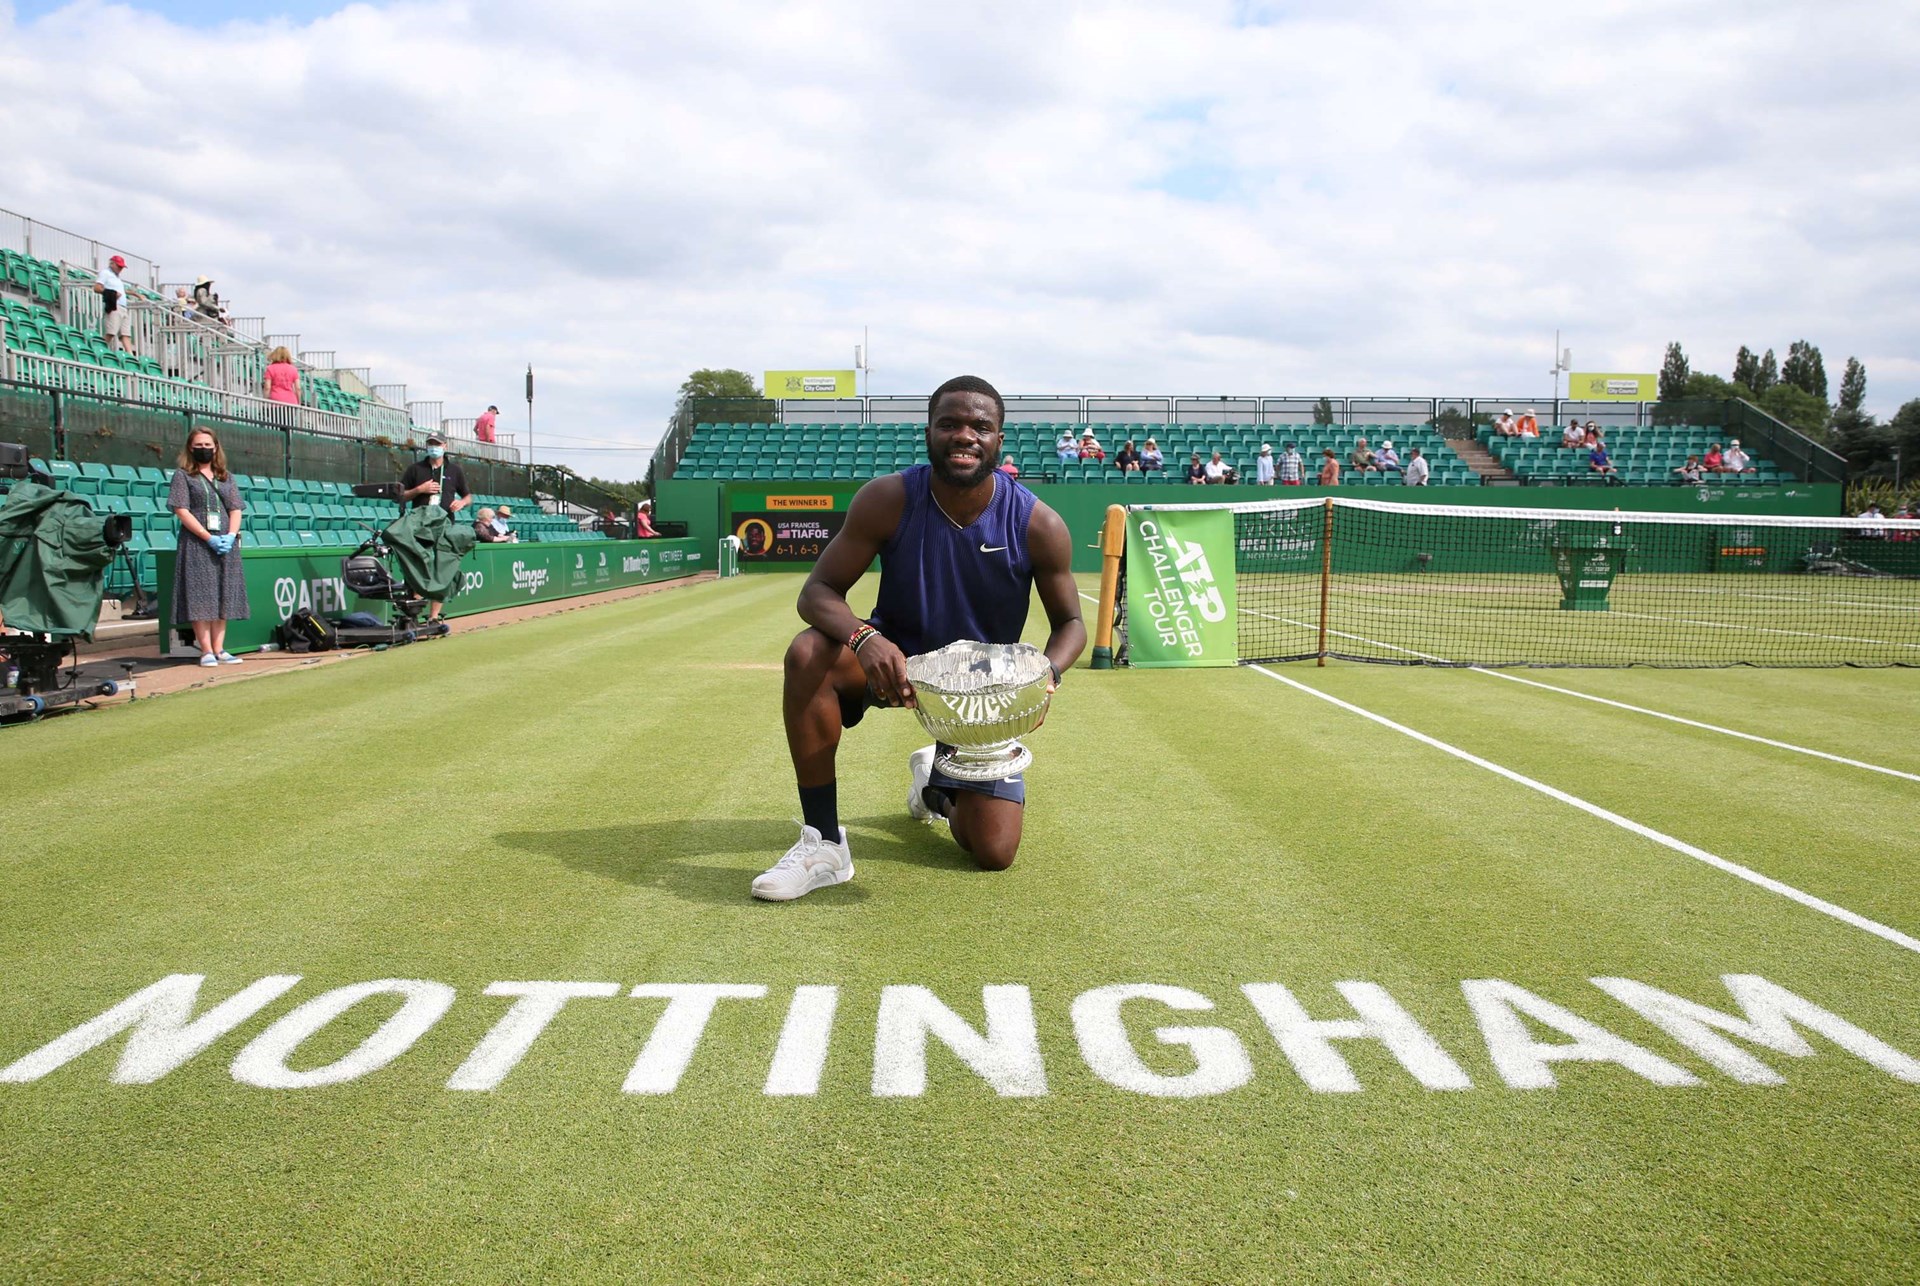 Rothesay Open Nottingham 2022 Preview, live stream, schedule, location